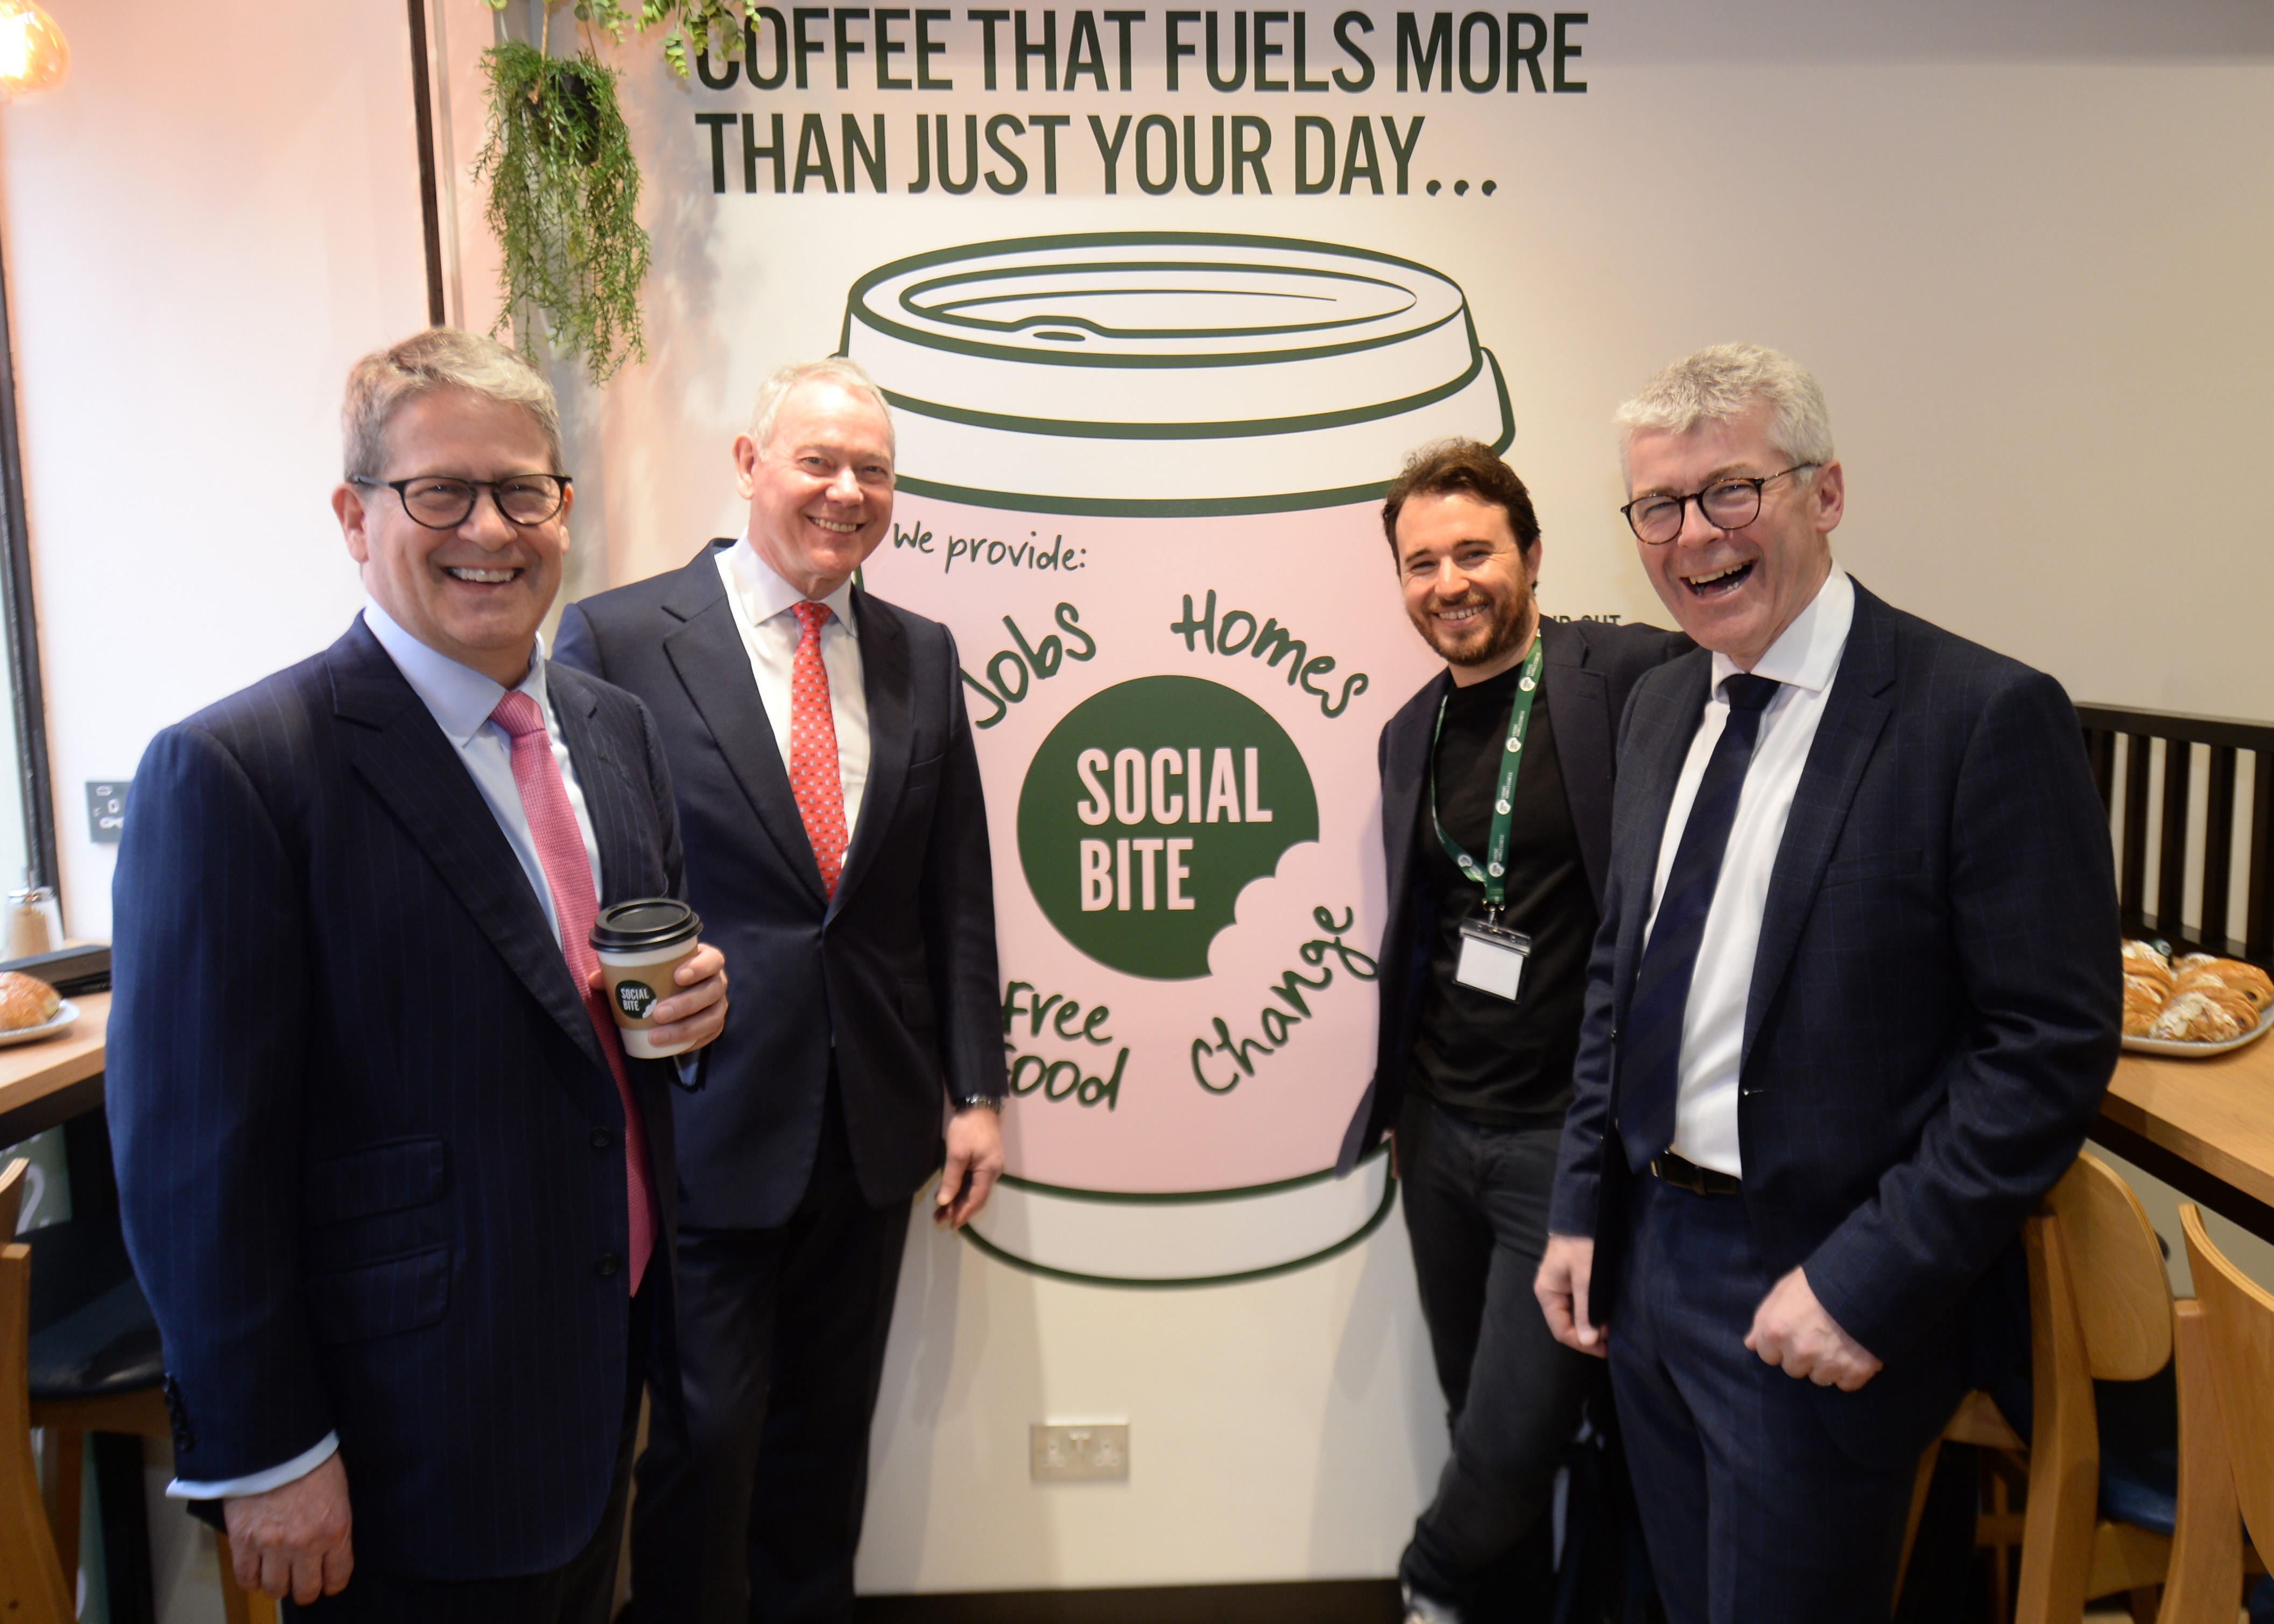 Social Bite opens its first coffee shop in London